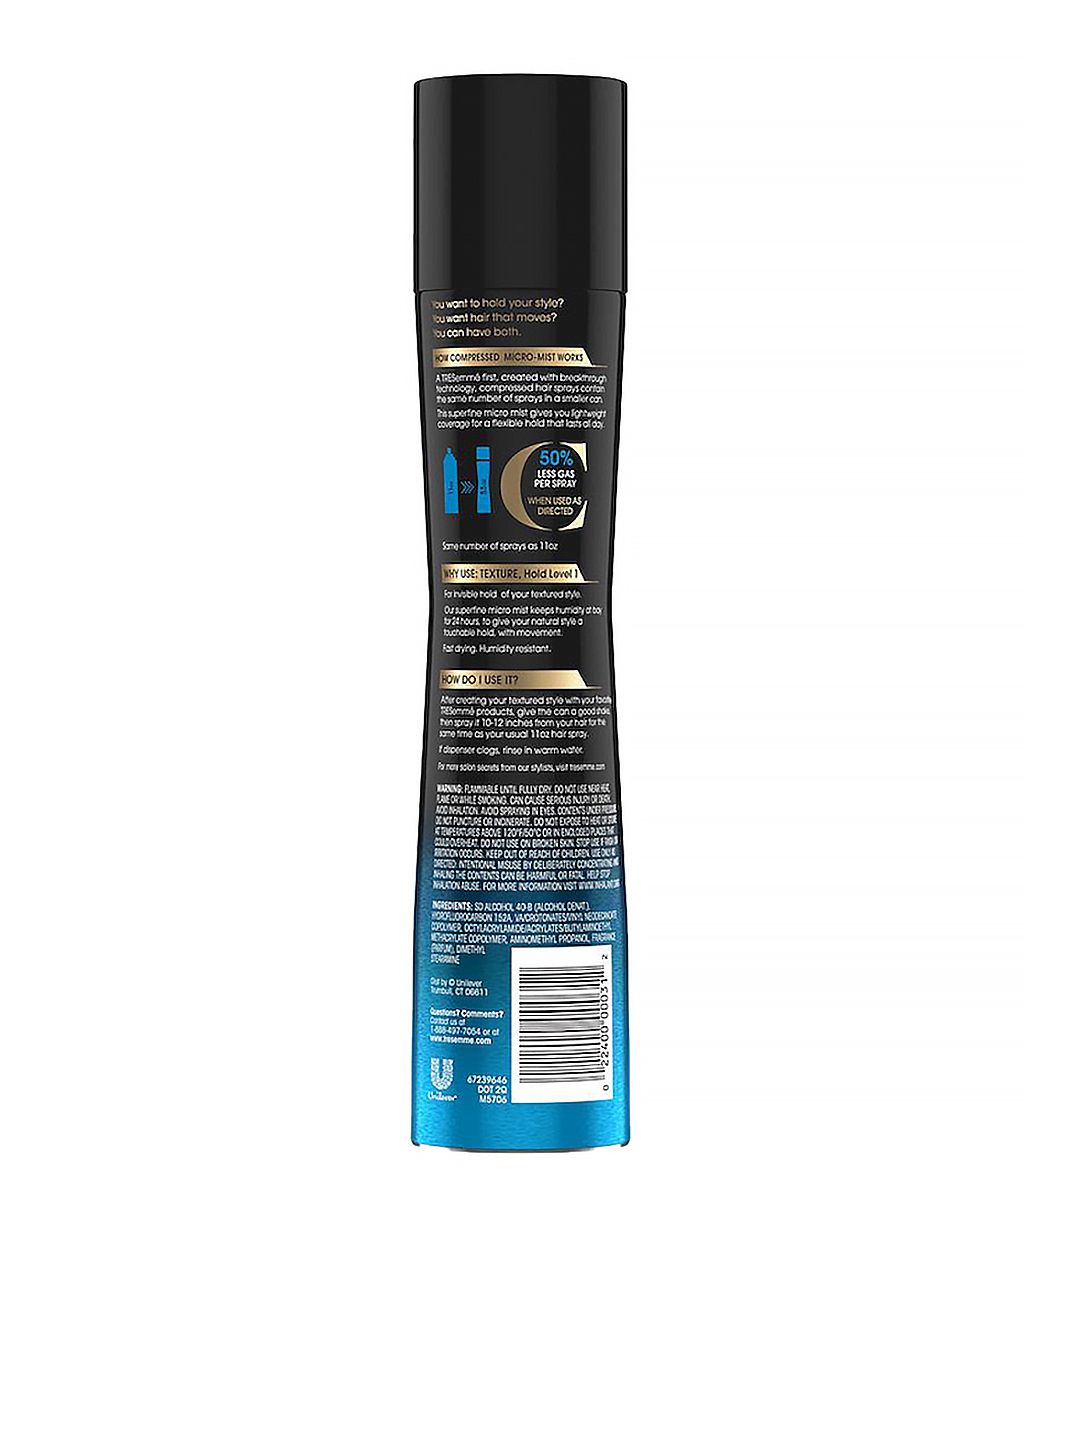 Tresemme Compressed Micro Mist Hair Spray, Extra Hold, Natural